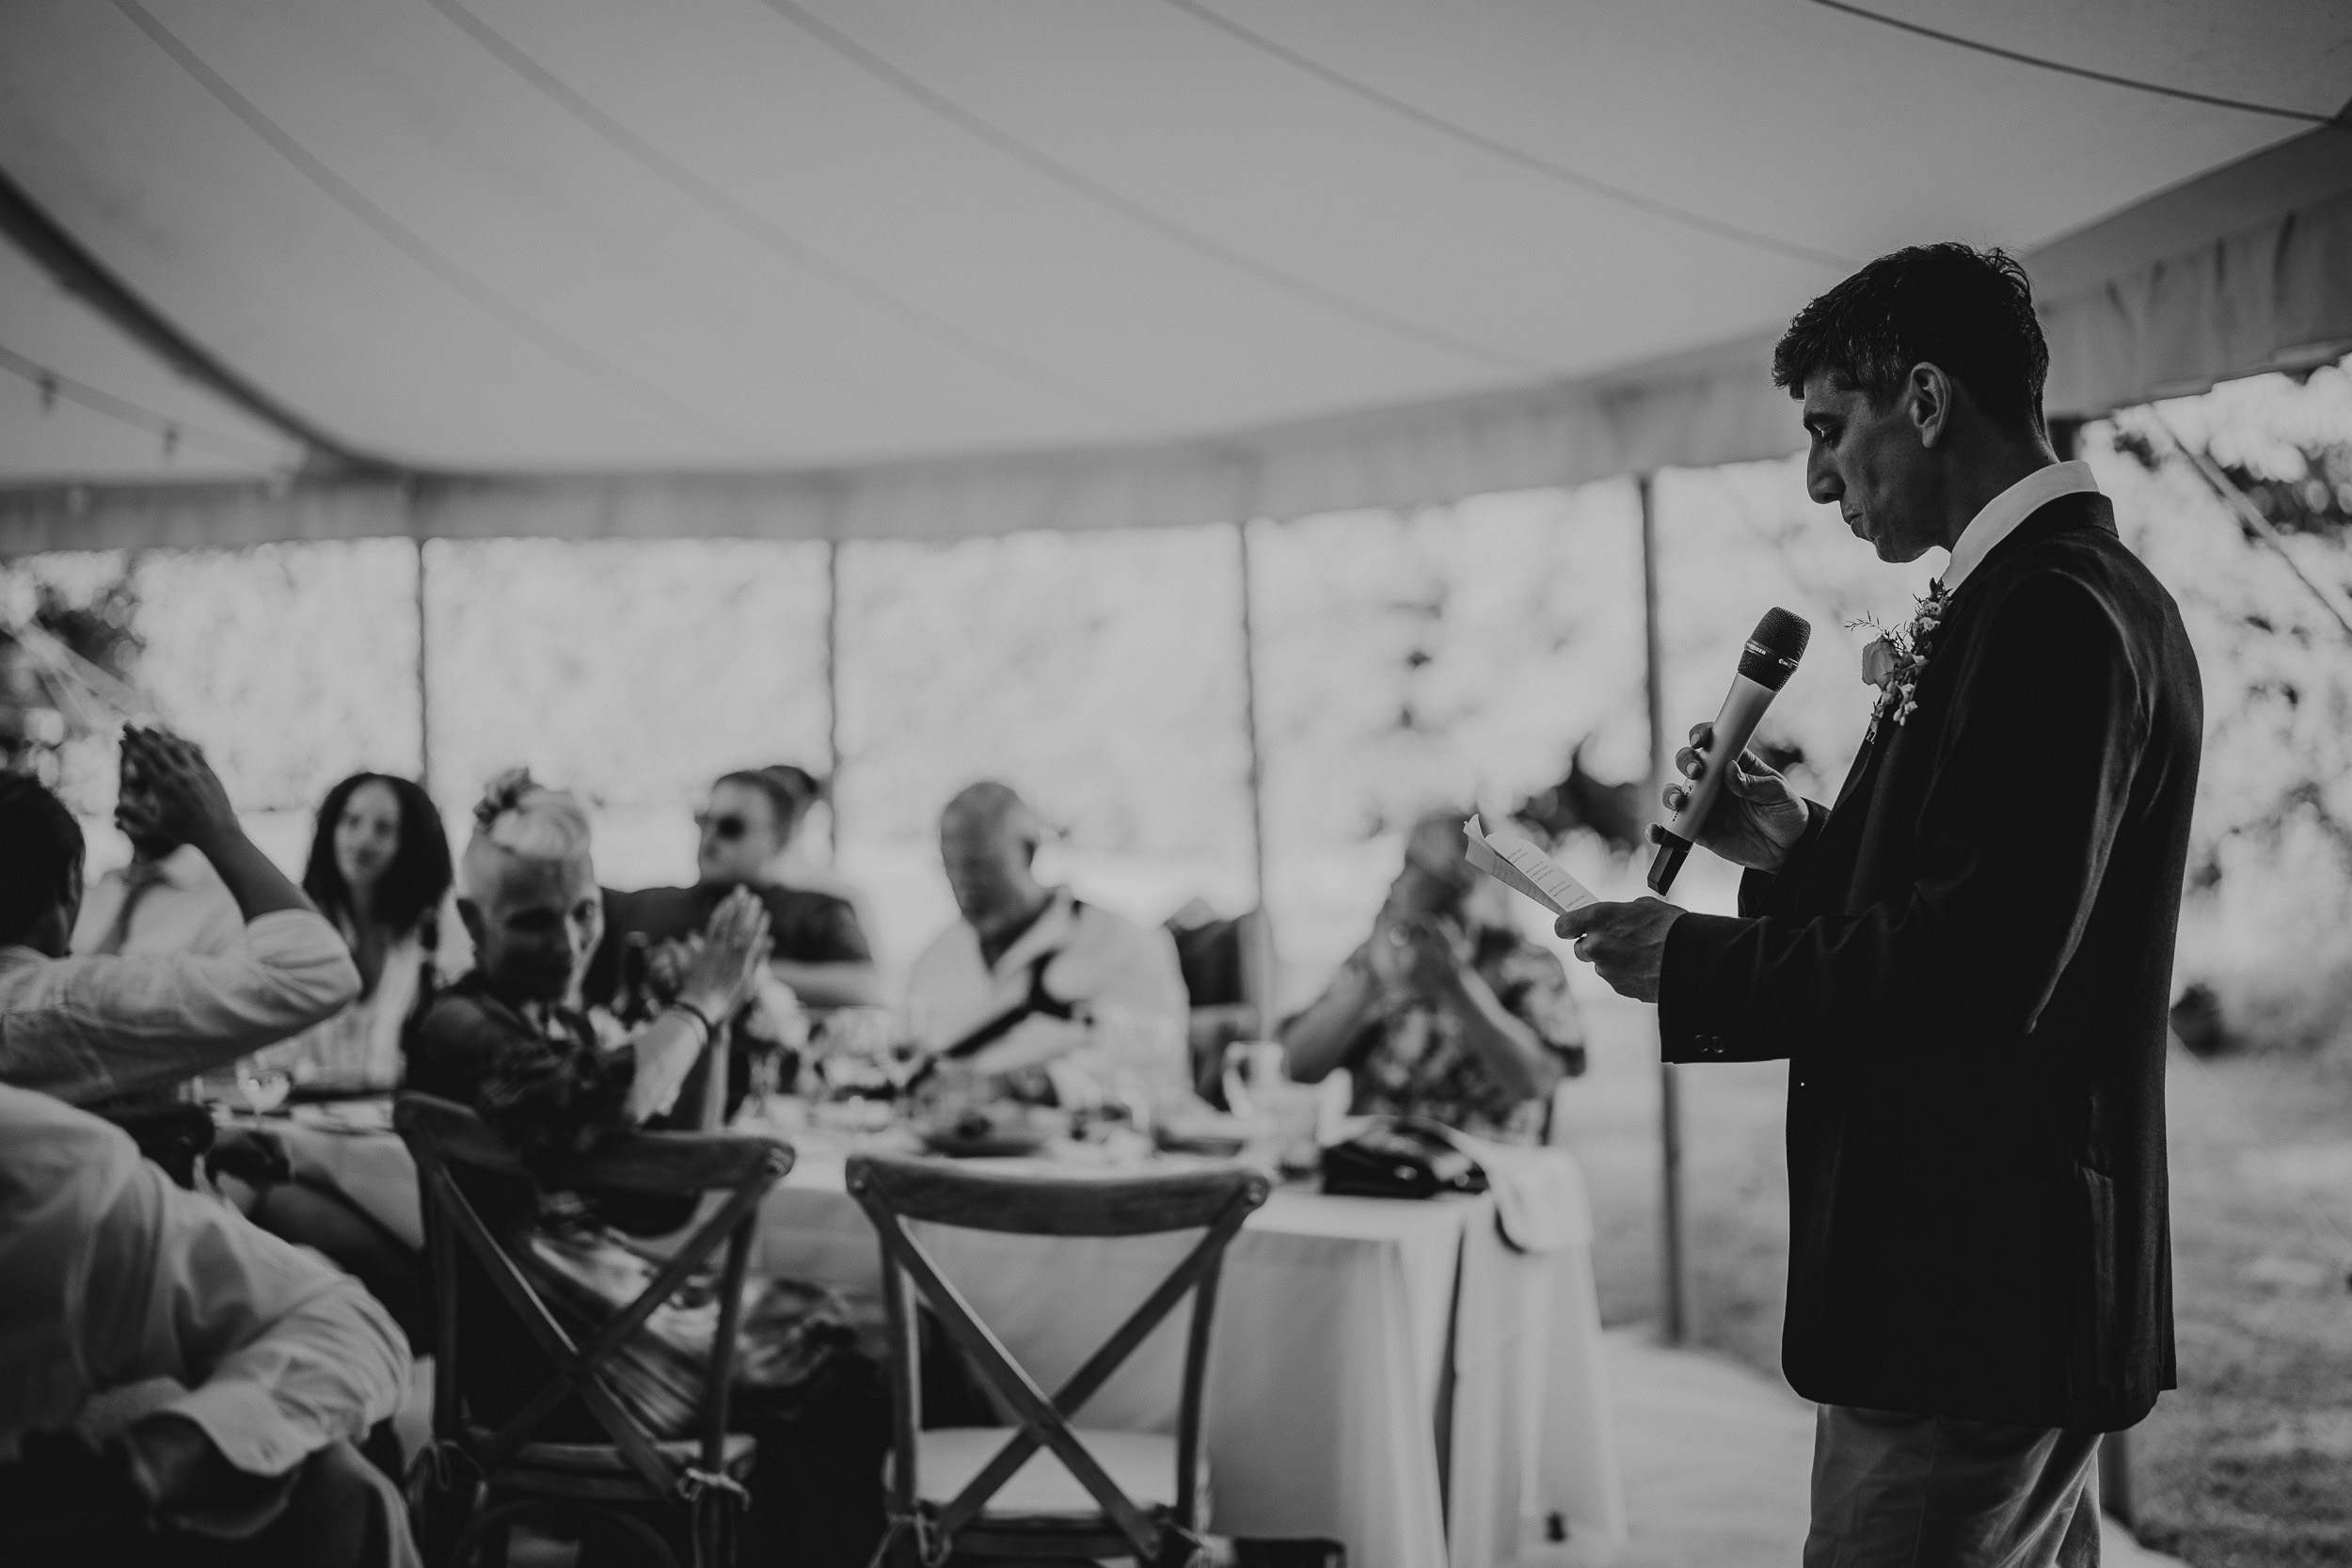 A wedding photographer captures a black and white photo of the groom while giving a speech at the wedding.